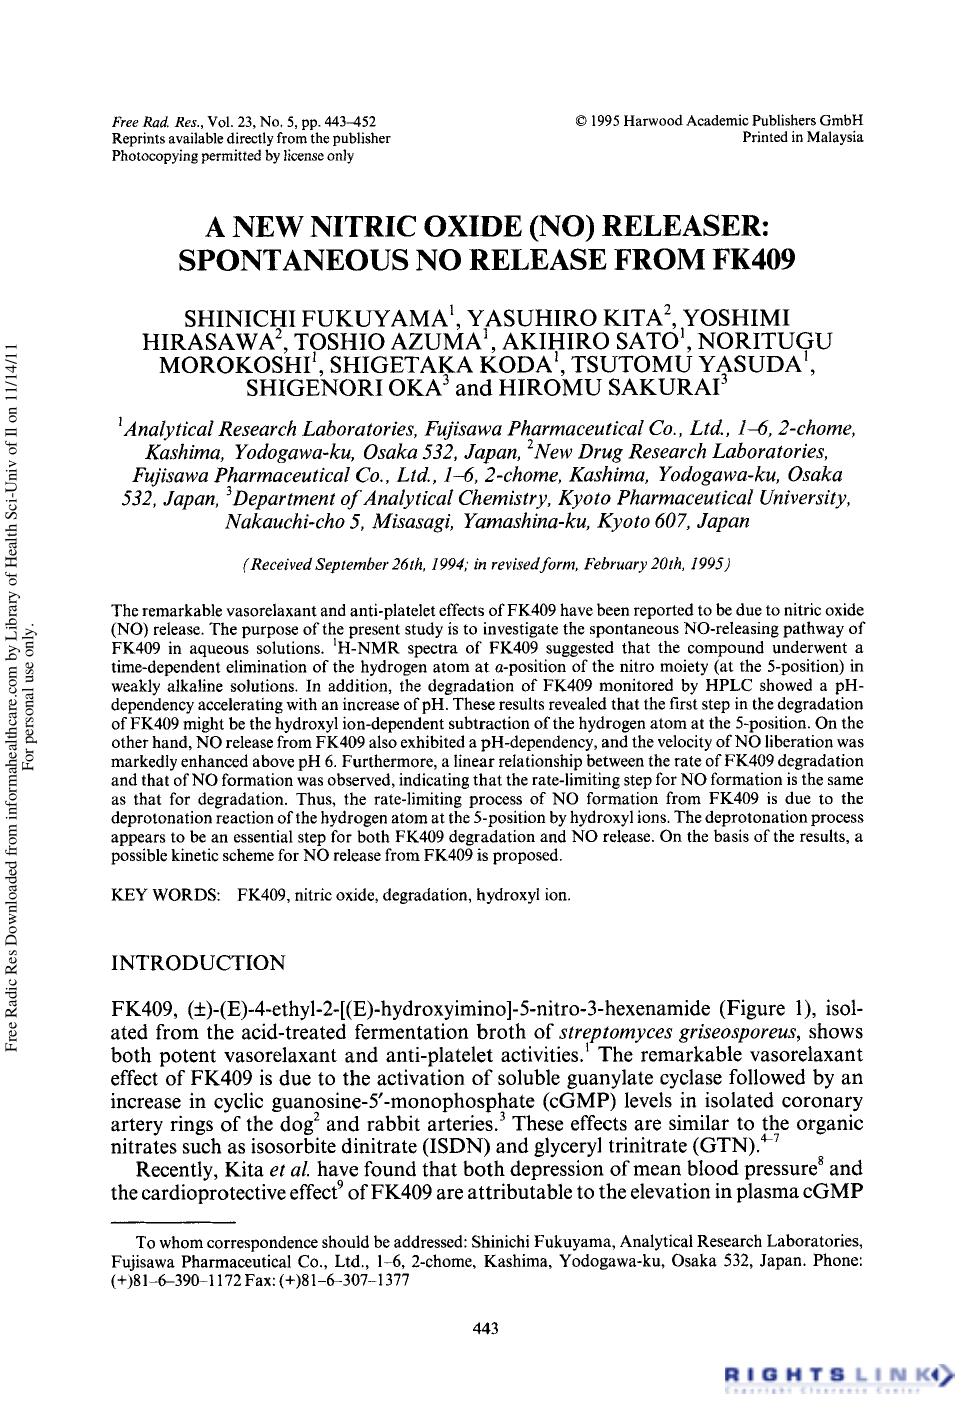 A New Nitric Oxide (No) Releaser: Spontaneous No Release from Fk409 by unknow